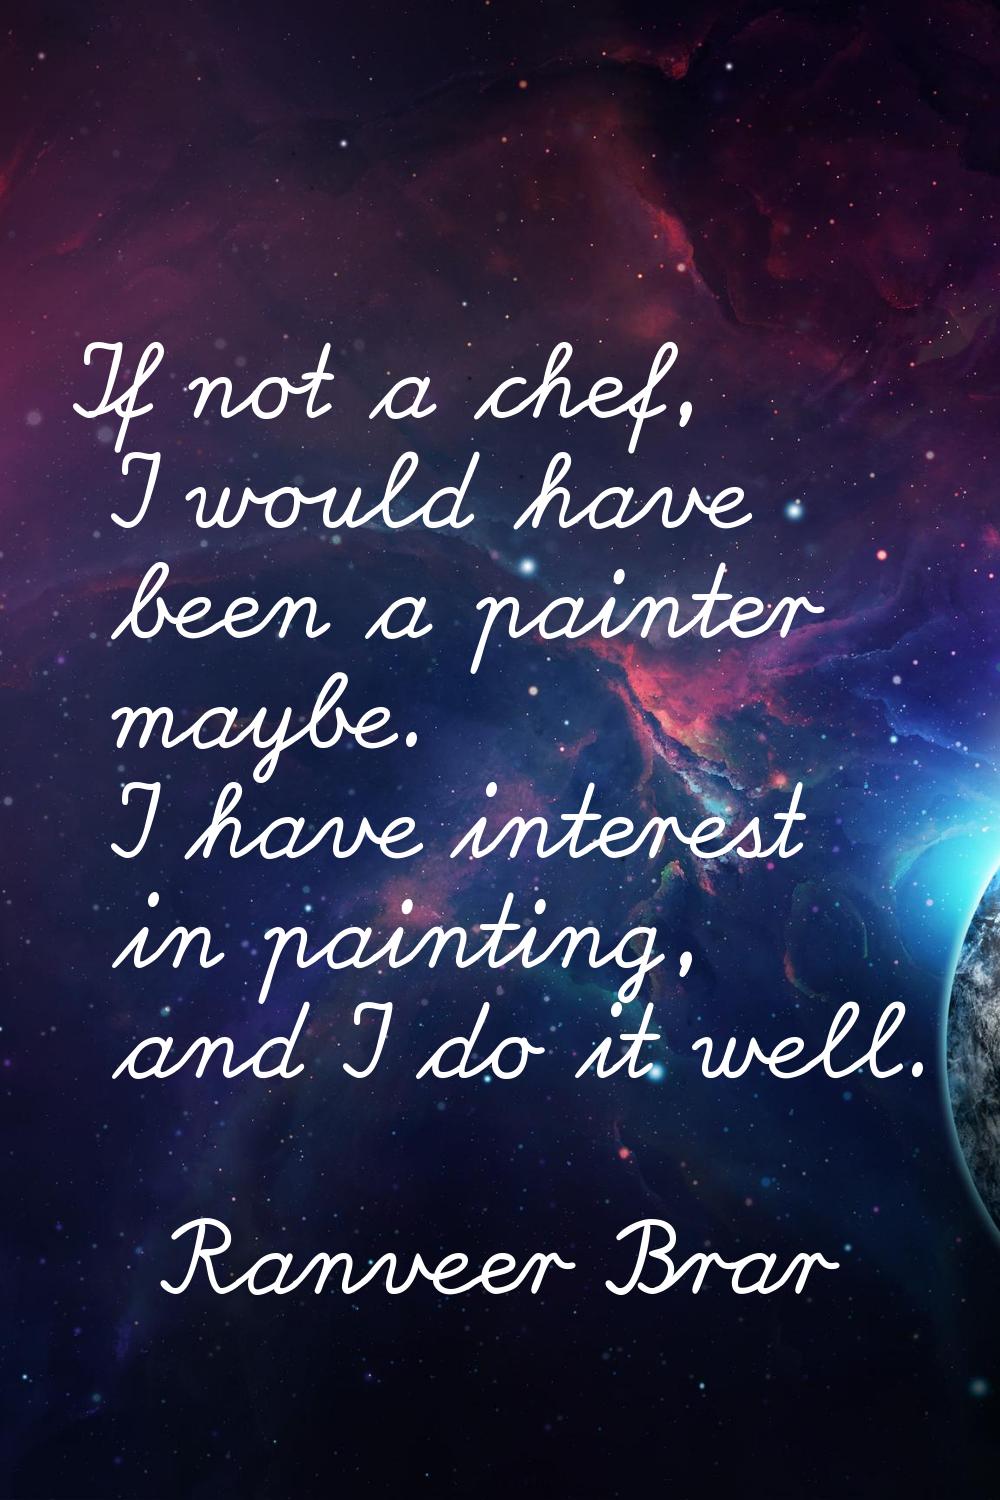 If not a chef, I would have been a painter maybe. I have interest in painting, and I do it well.